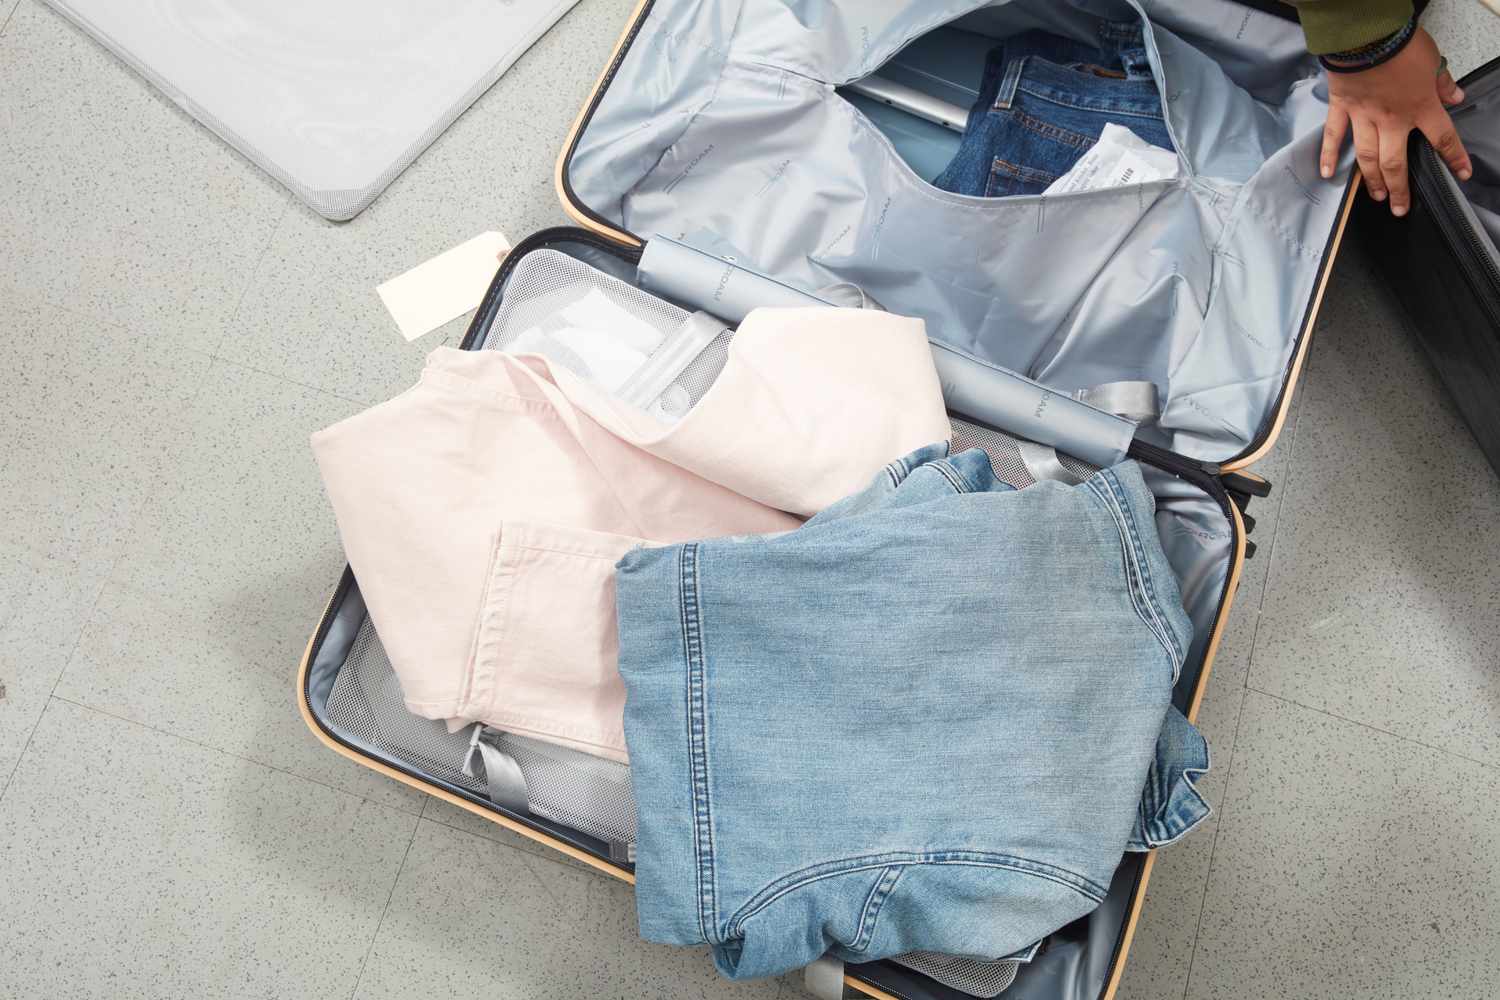 clothing packed in roam the check in 